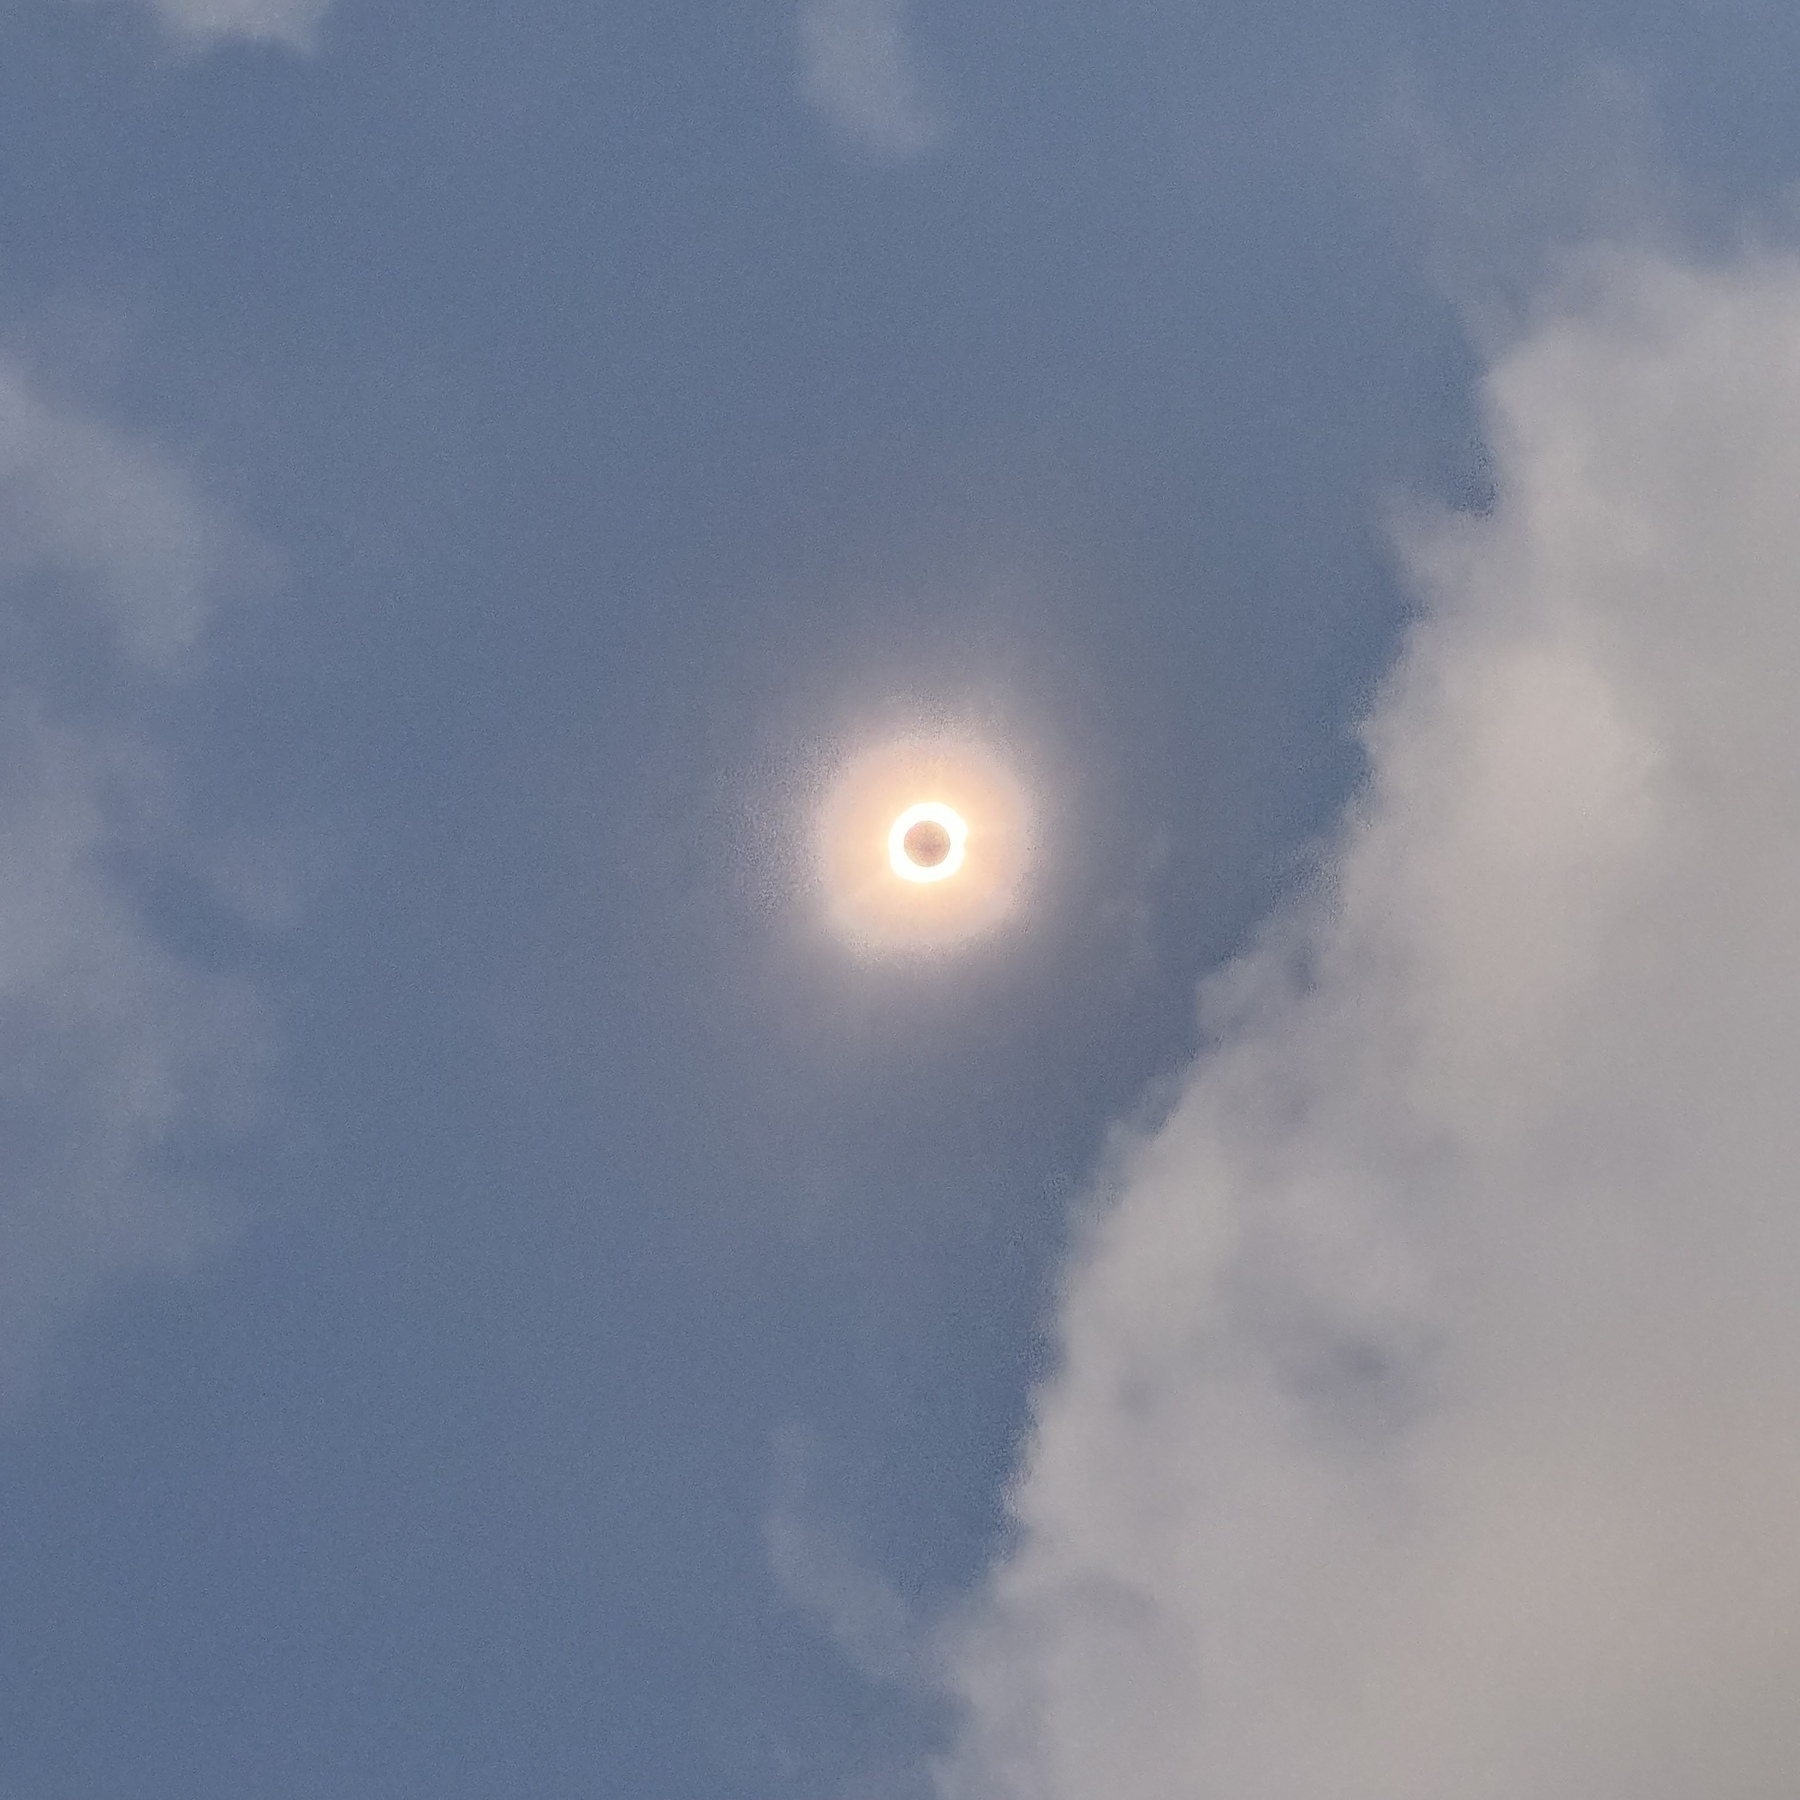 Solar eclipse at totality